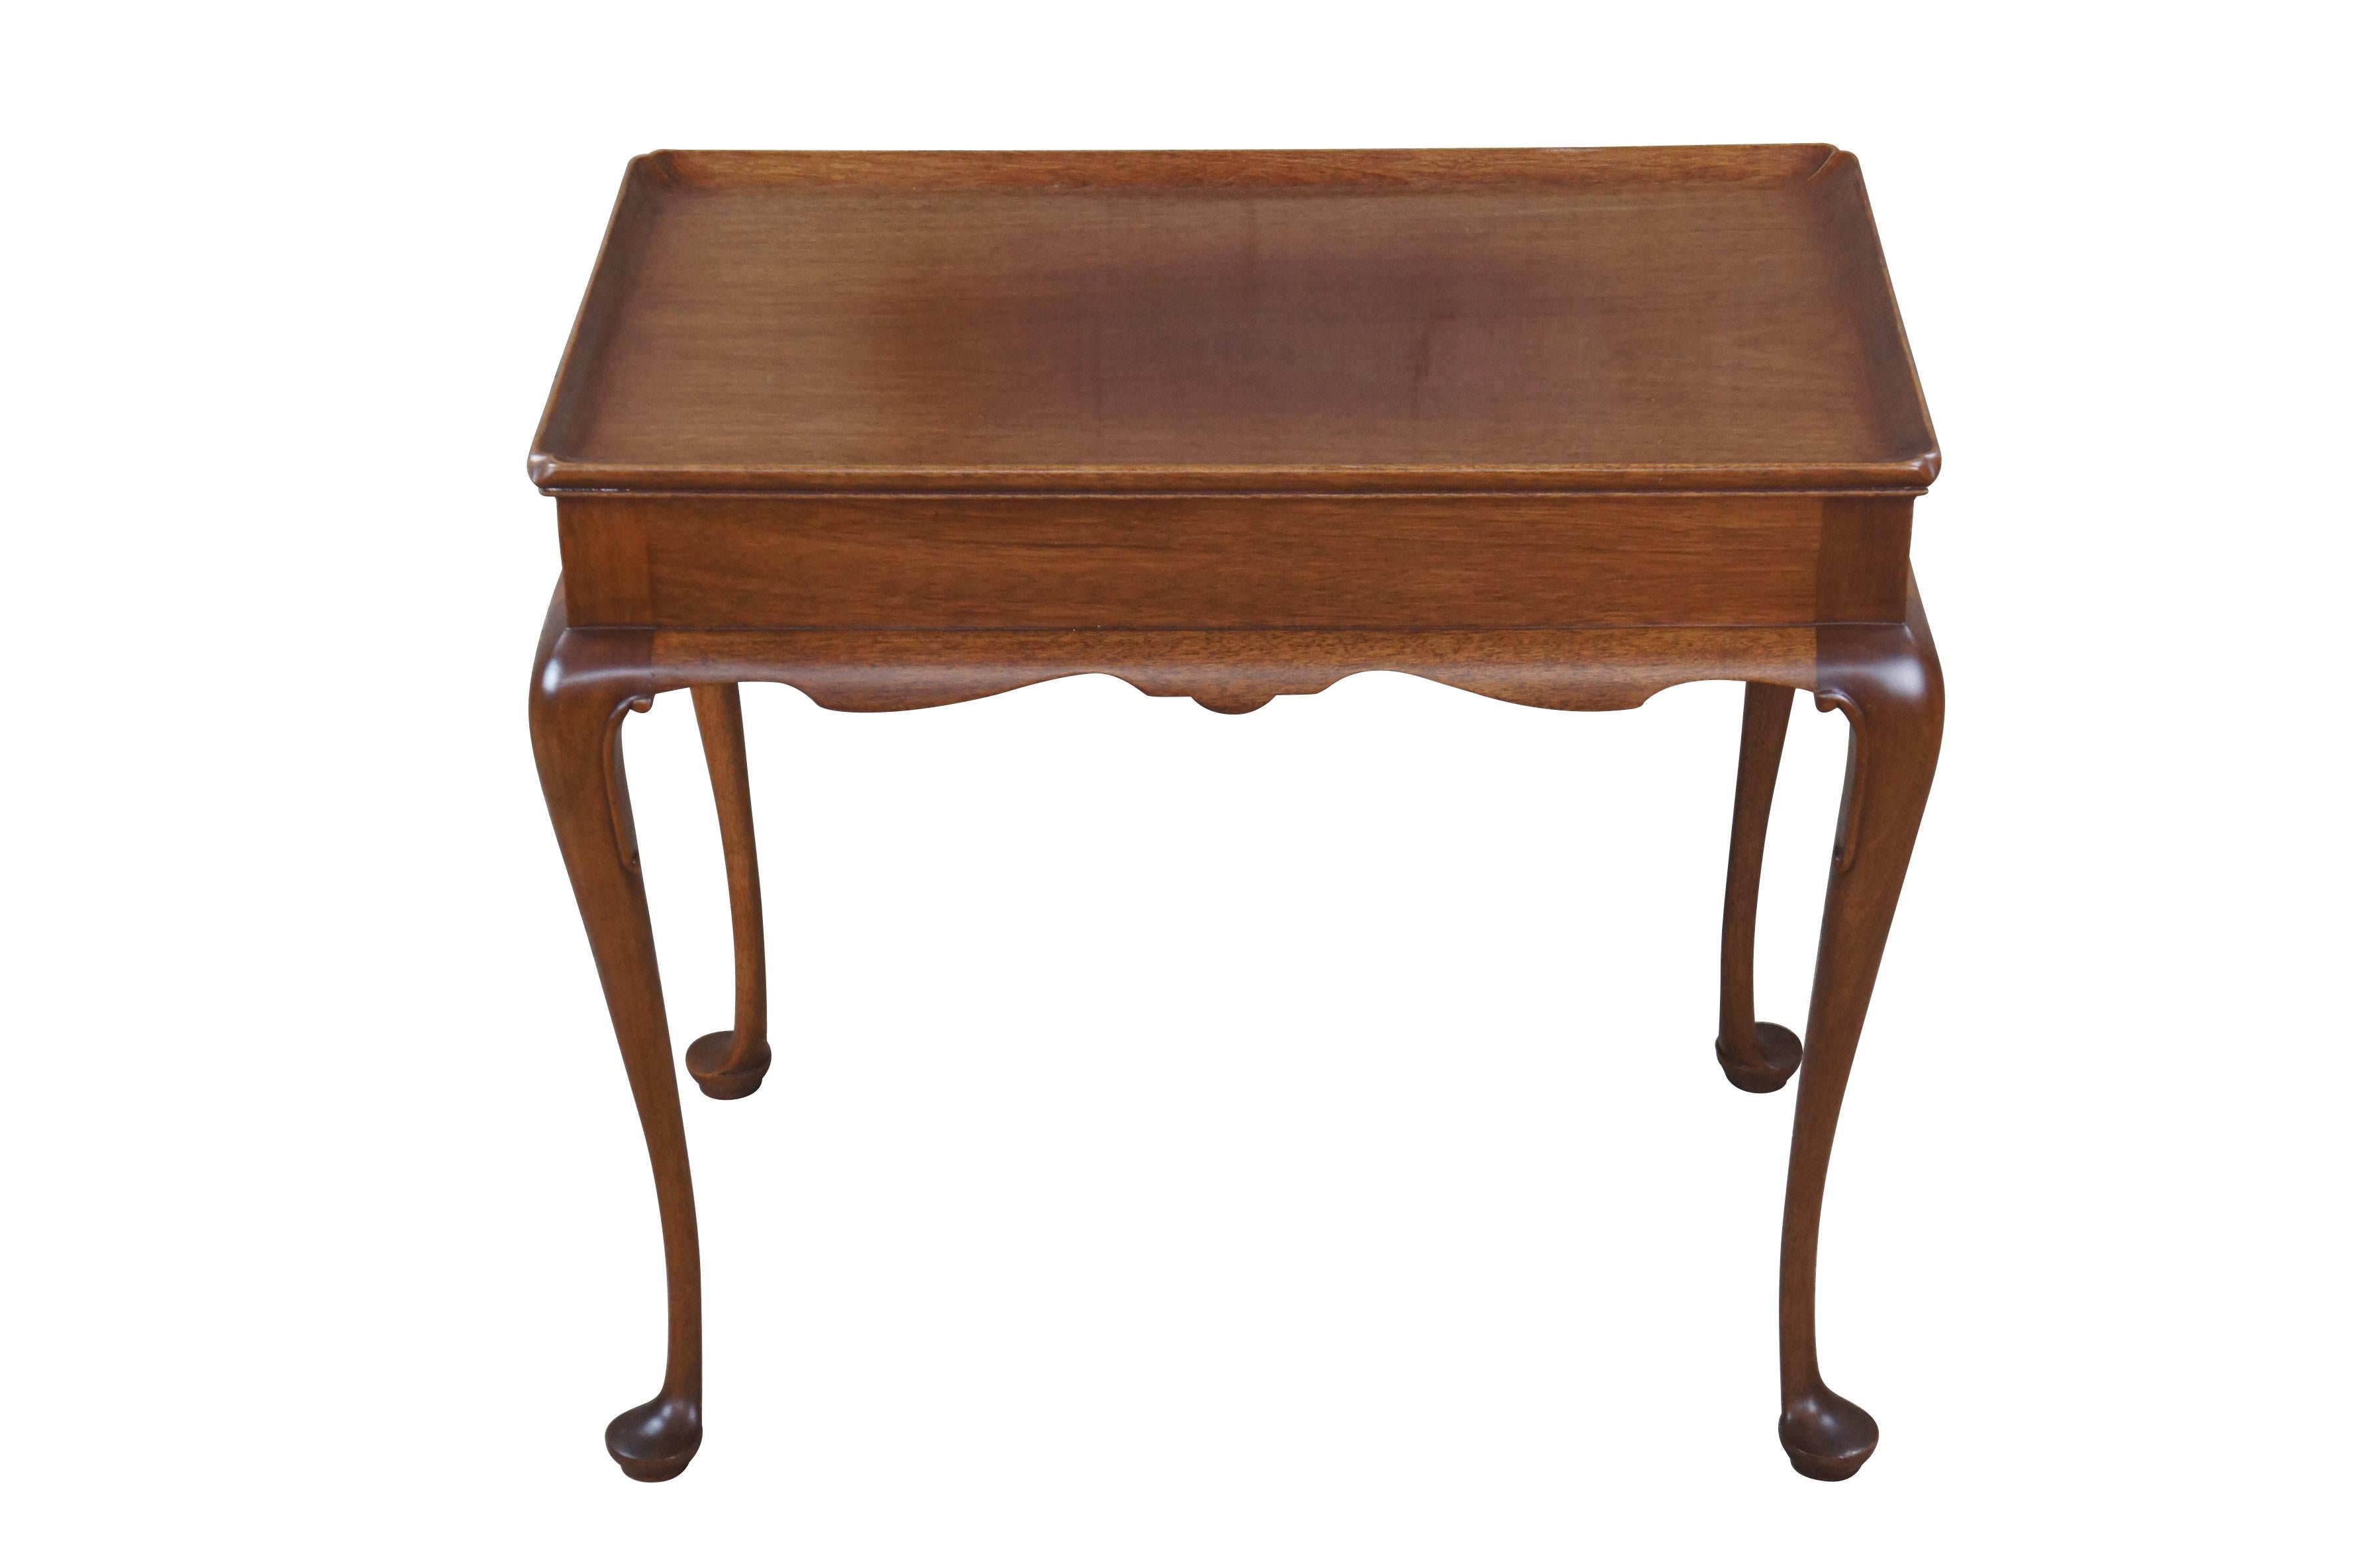 Biggs Furniture Queen Anne style tea table, circa last half 20th century. Made from mahogany with an inset top, serpentine scalloped skirt and cabriole legs leading paw feet. Originally Purchased from William W. Sauer Associates Ltd. Virginia Beach,